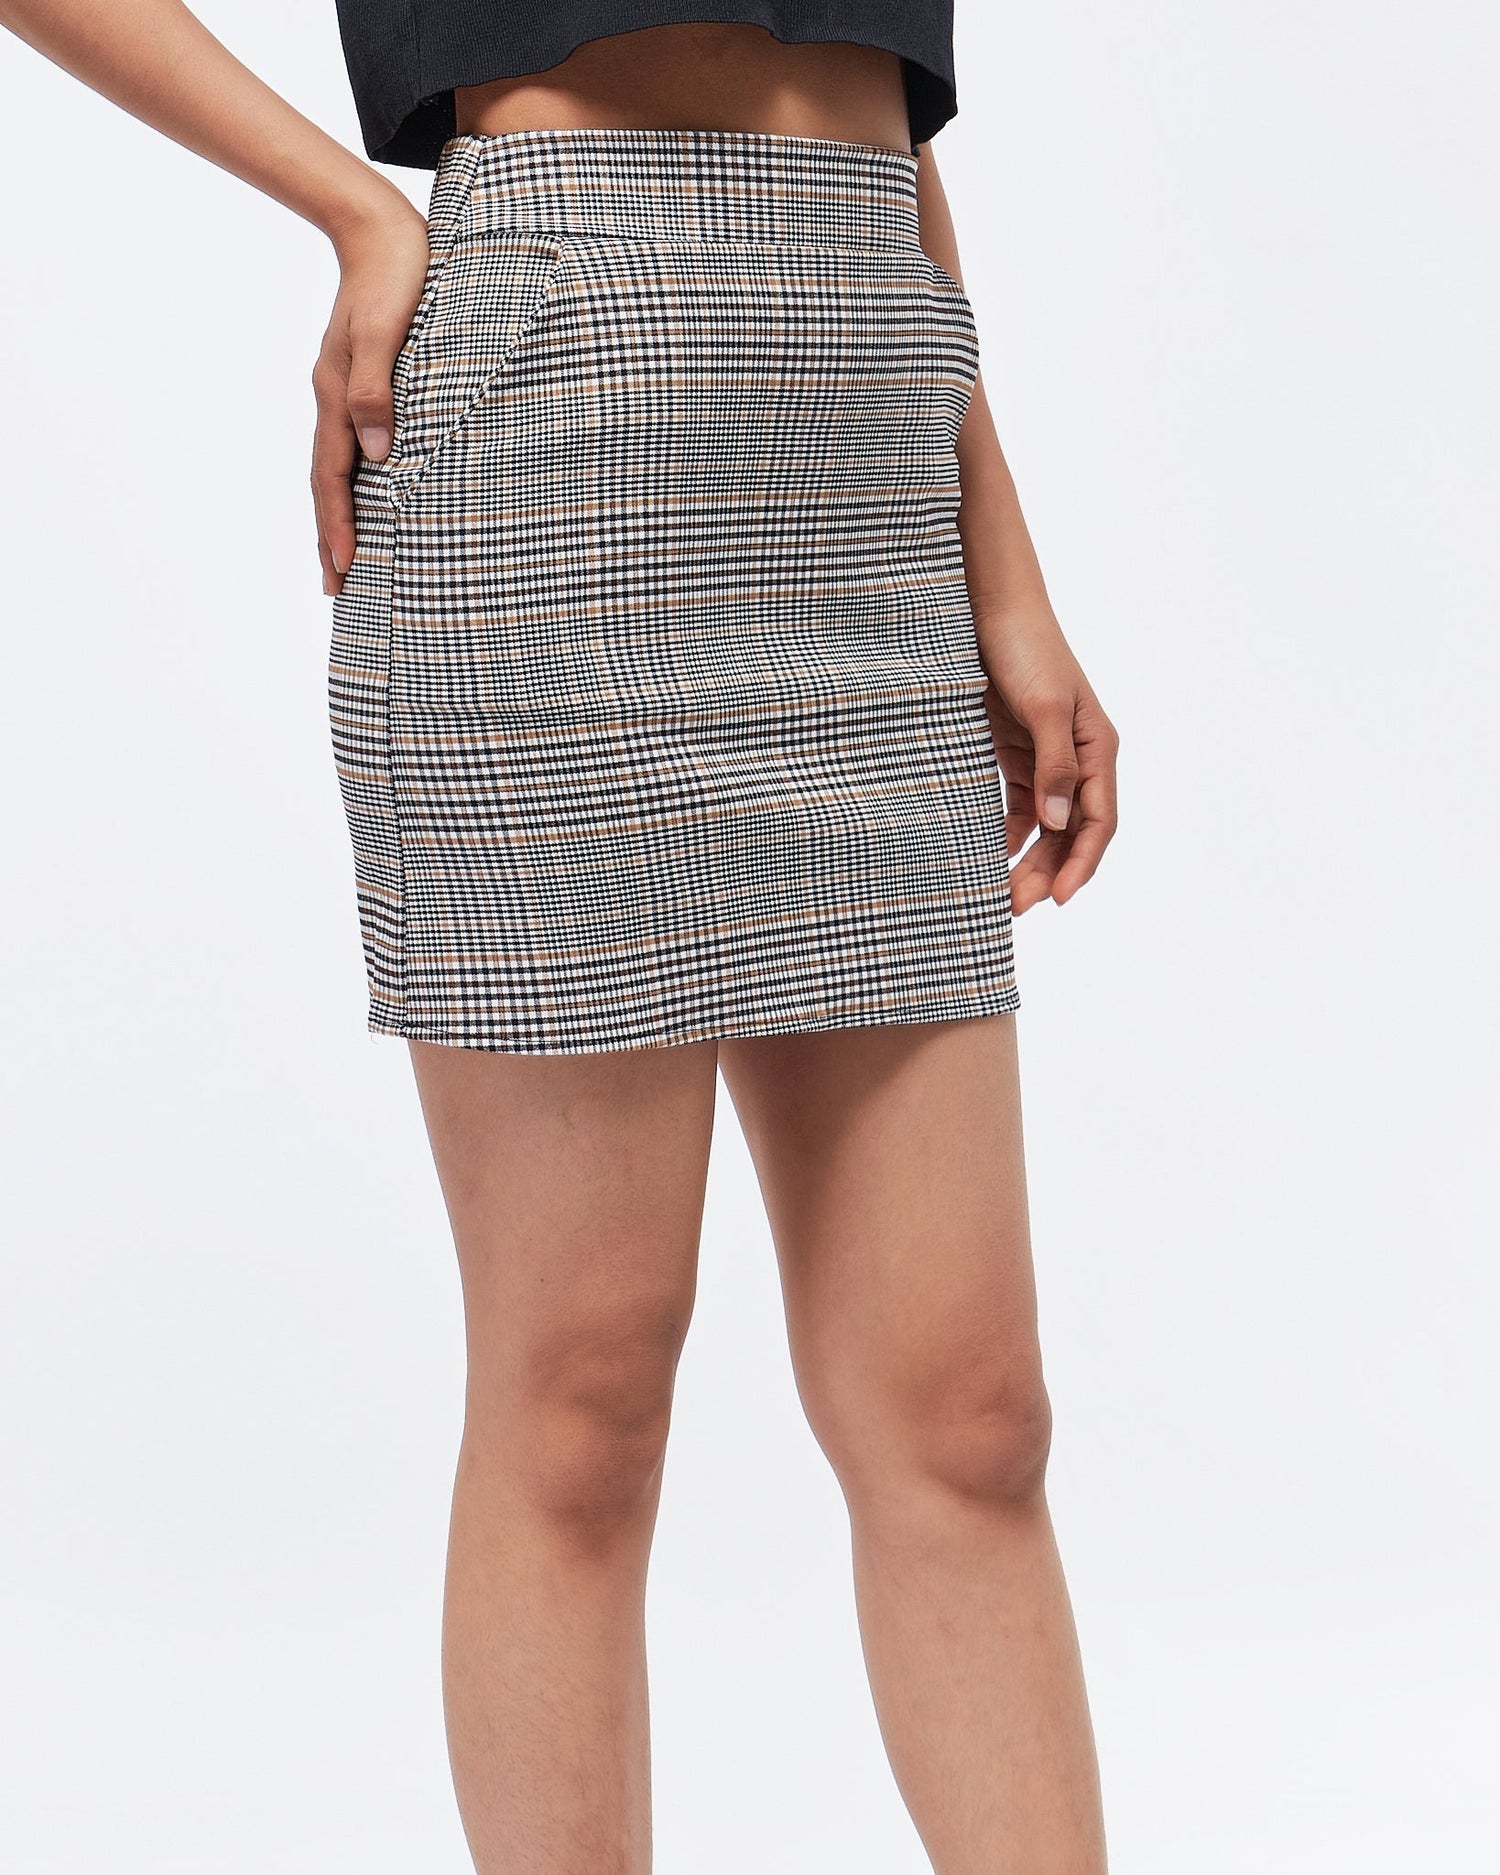 MOI OUTFIT-Vintage Checked Lady Skirts 9.90